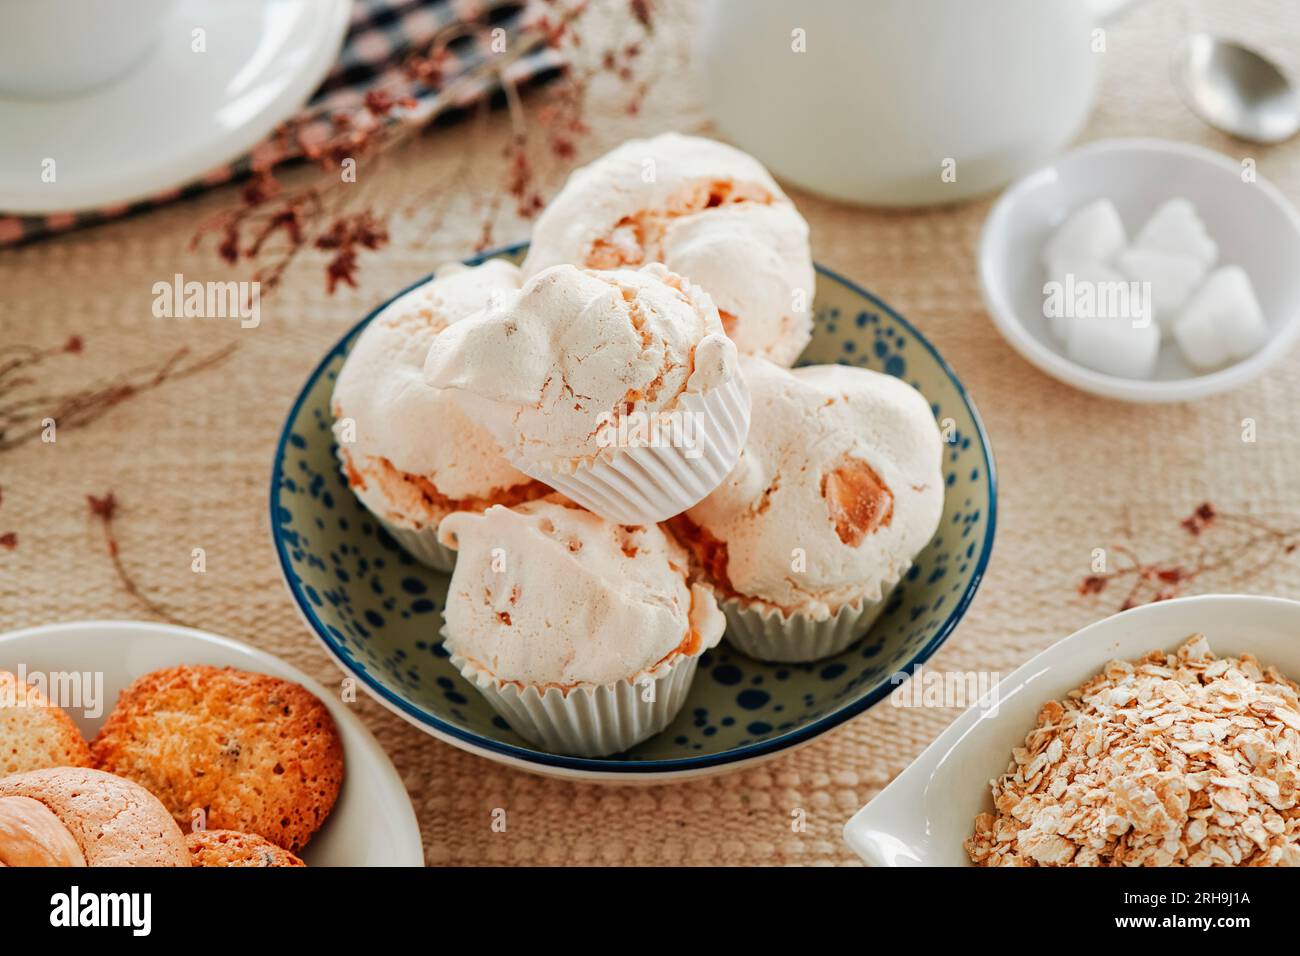 closeup of some merengues almendrados, spanish baked meringues with almonds, in a white ceramic bowl on a table set with a brown tablecloth next to a Stock Photo